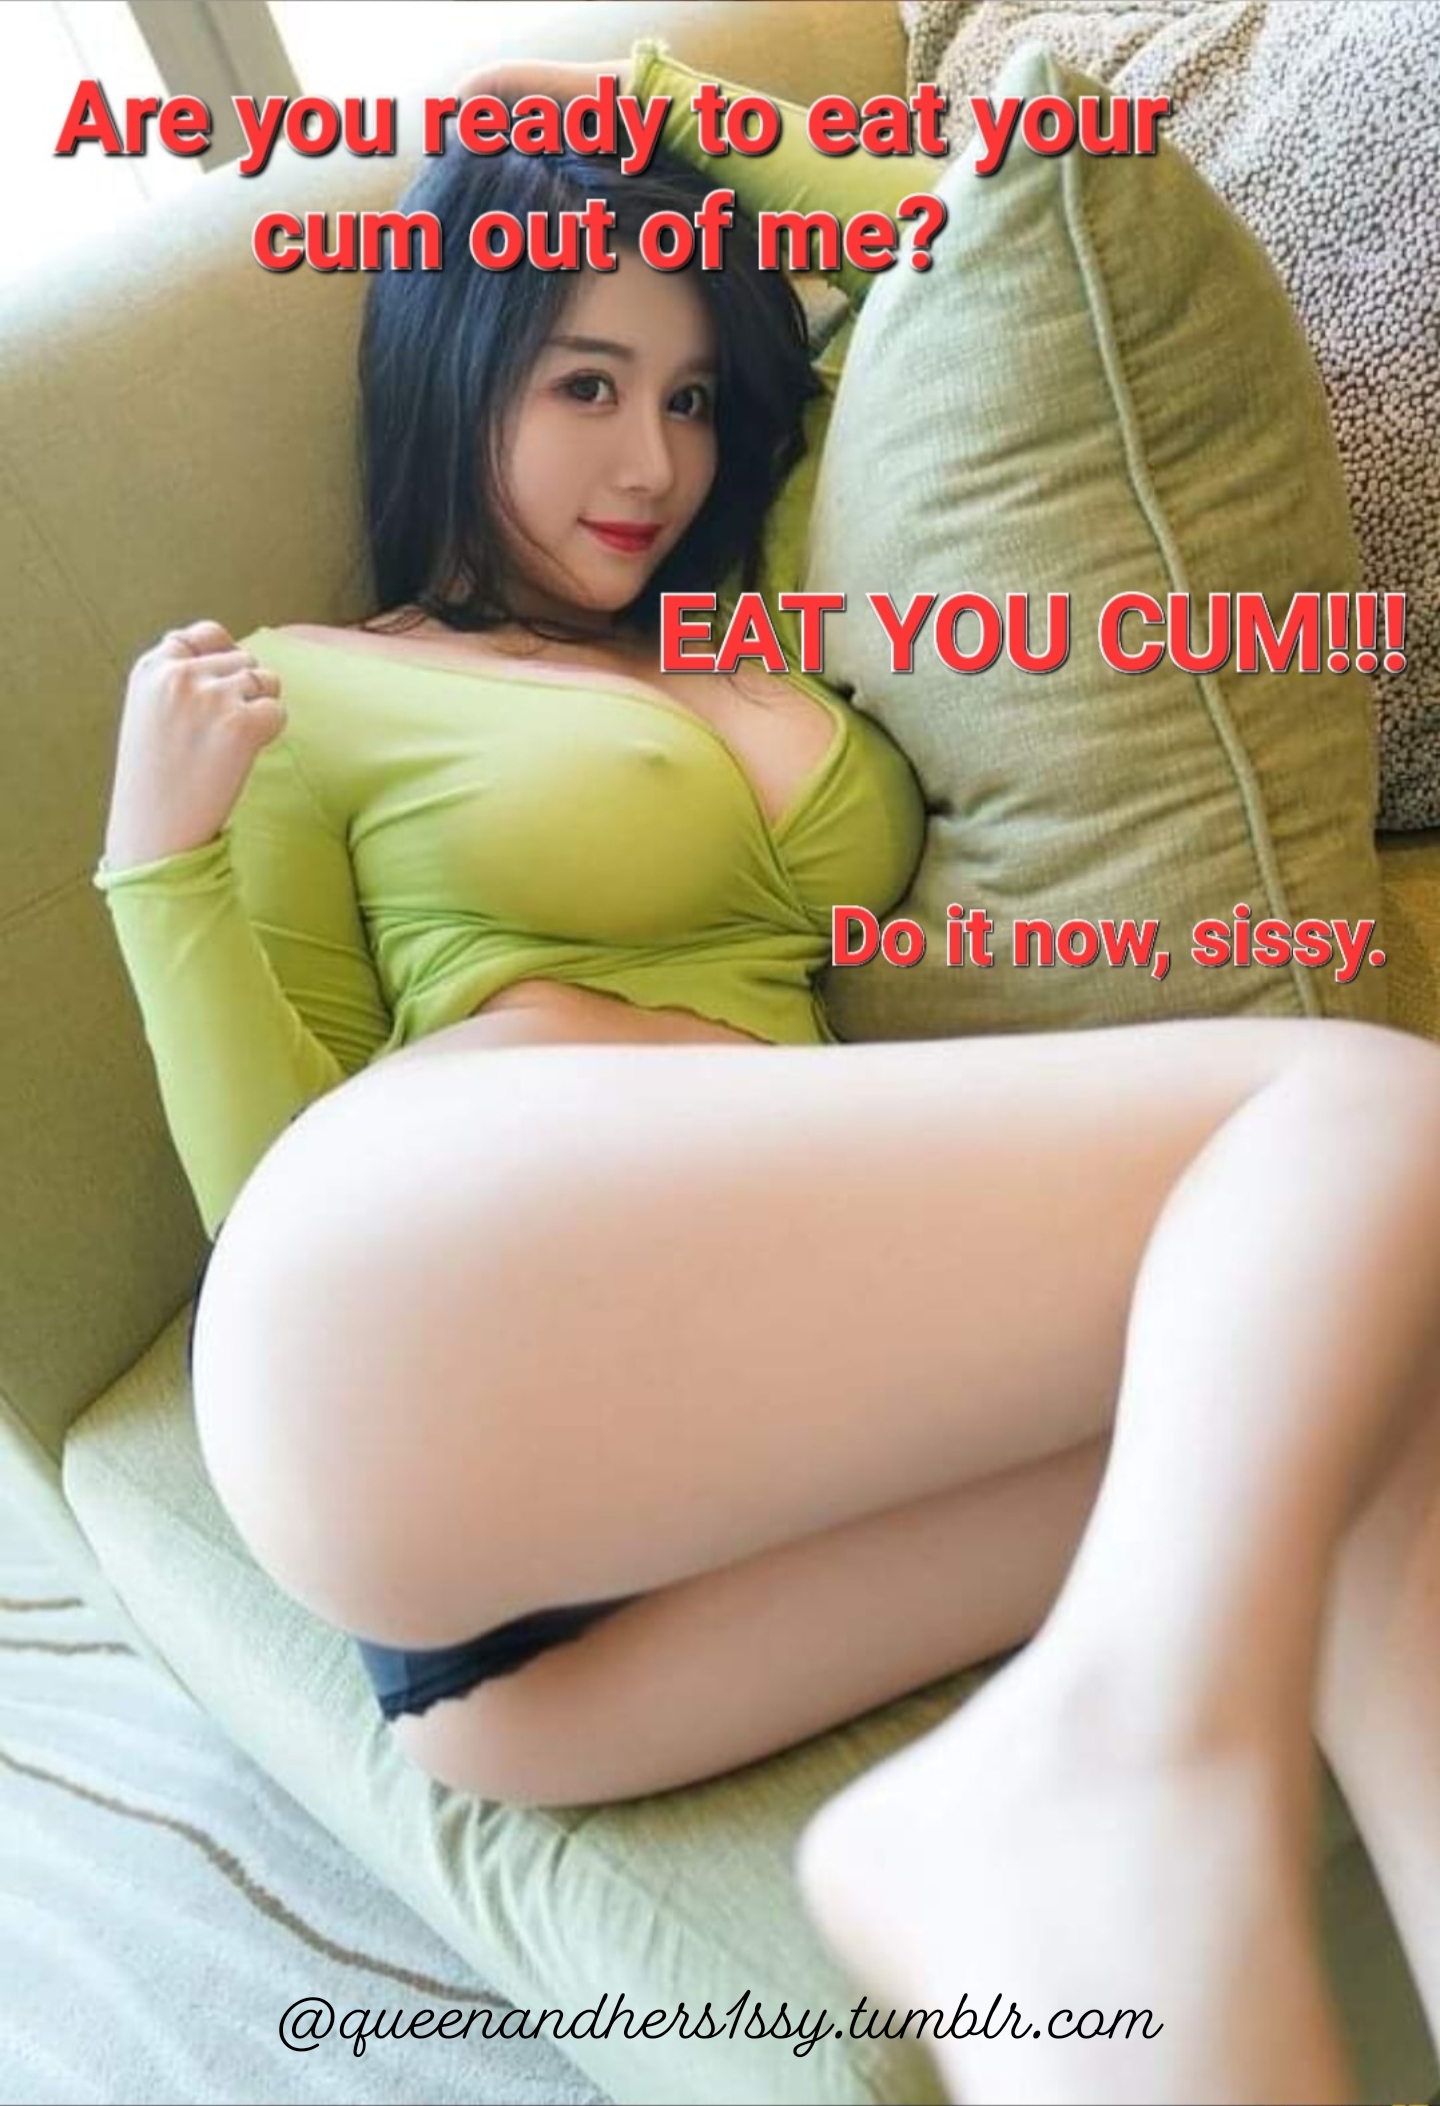 dino soriano recommends Eat Your Cum